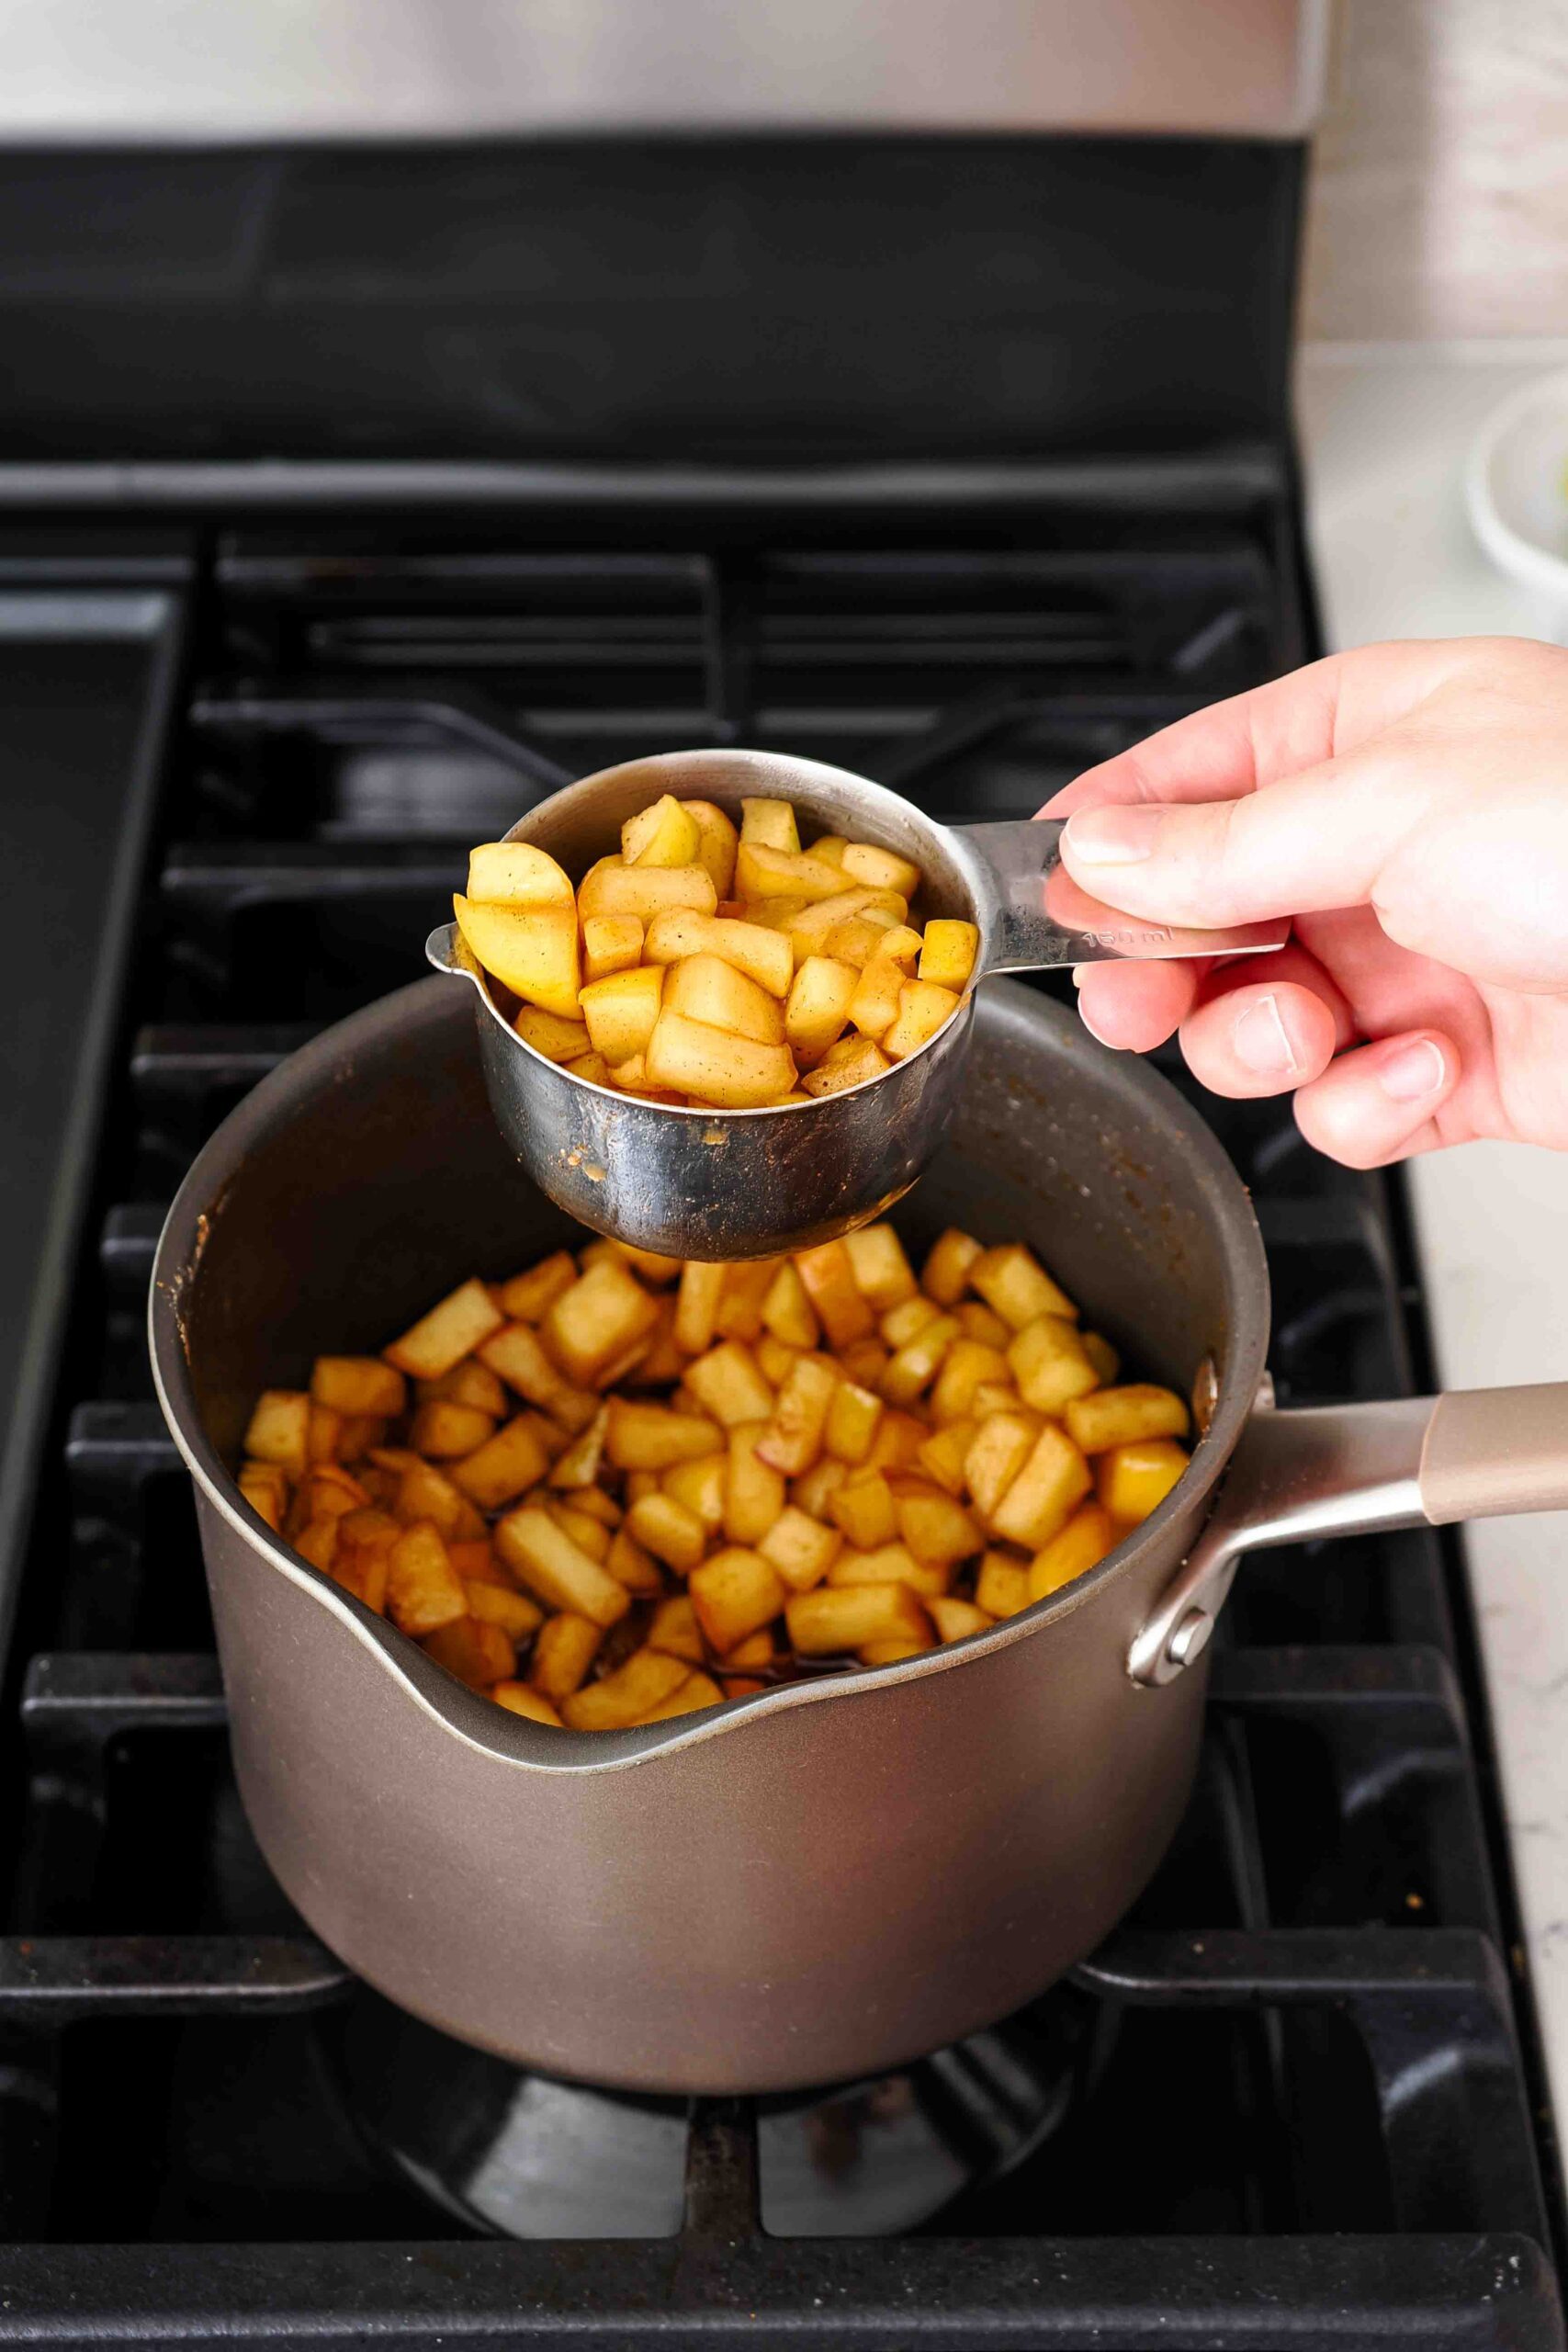 One cup of cooked and spiced apple pieces is removed from a pot.